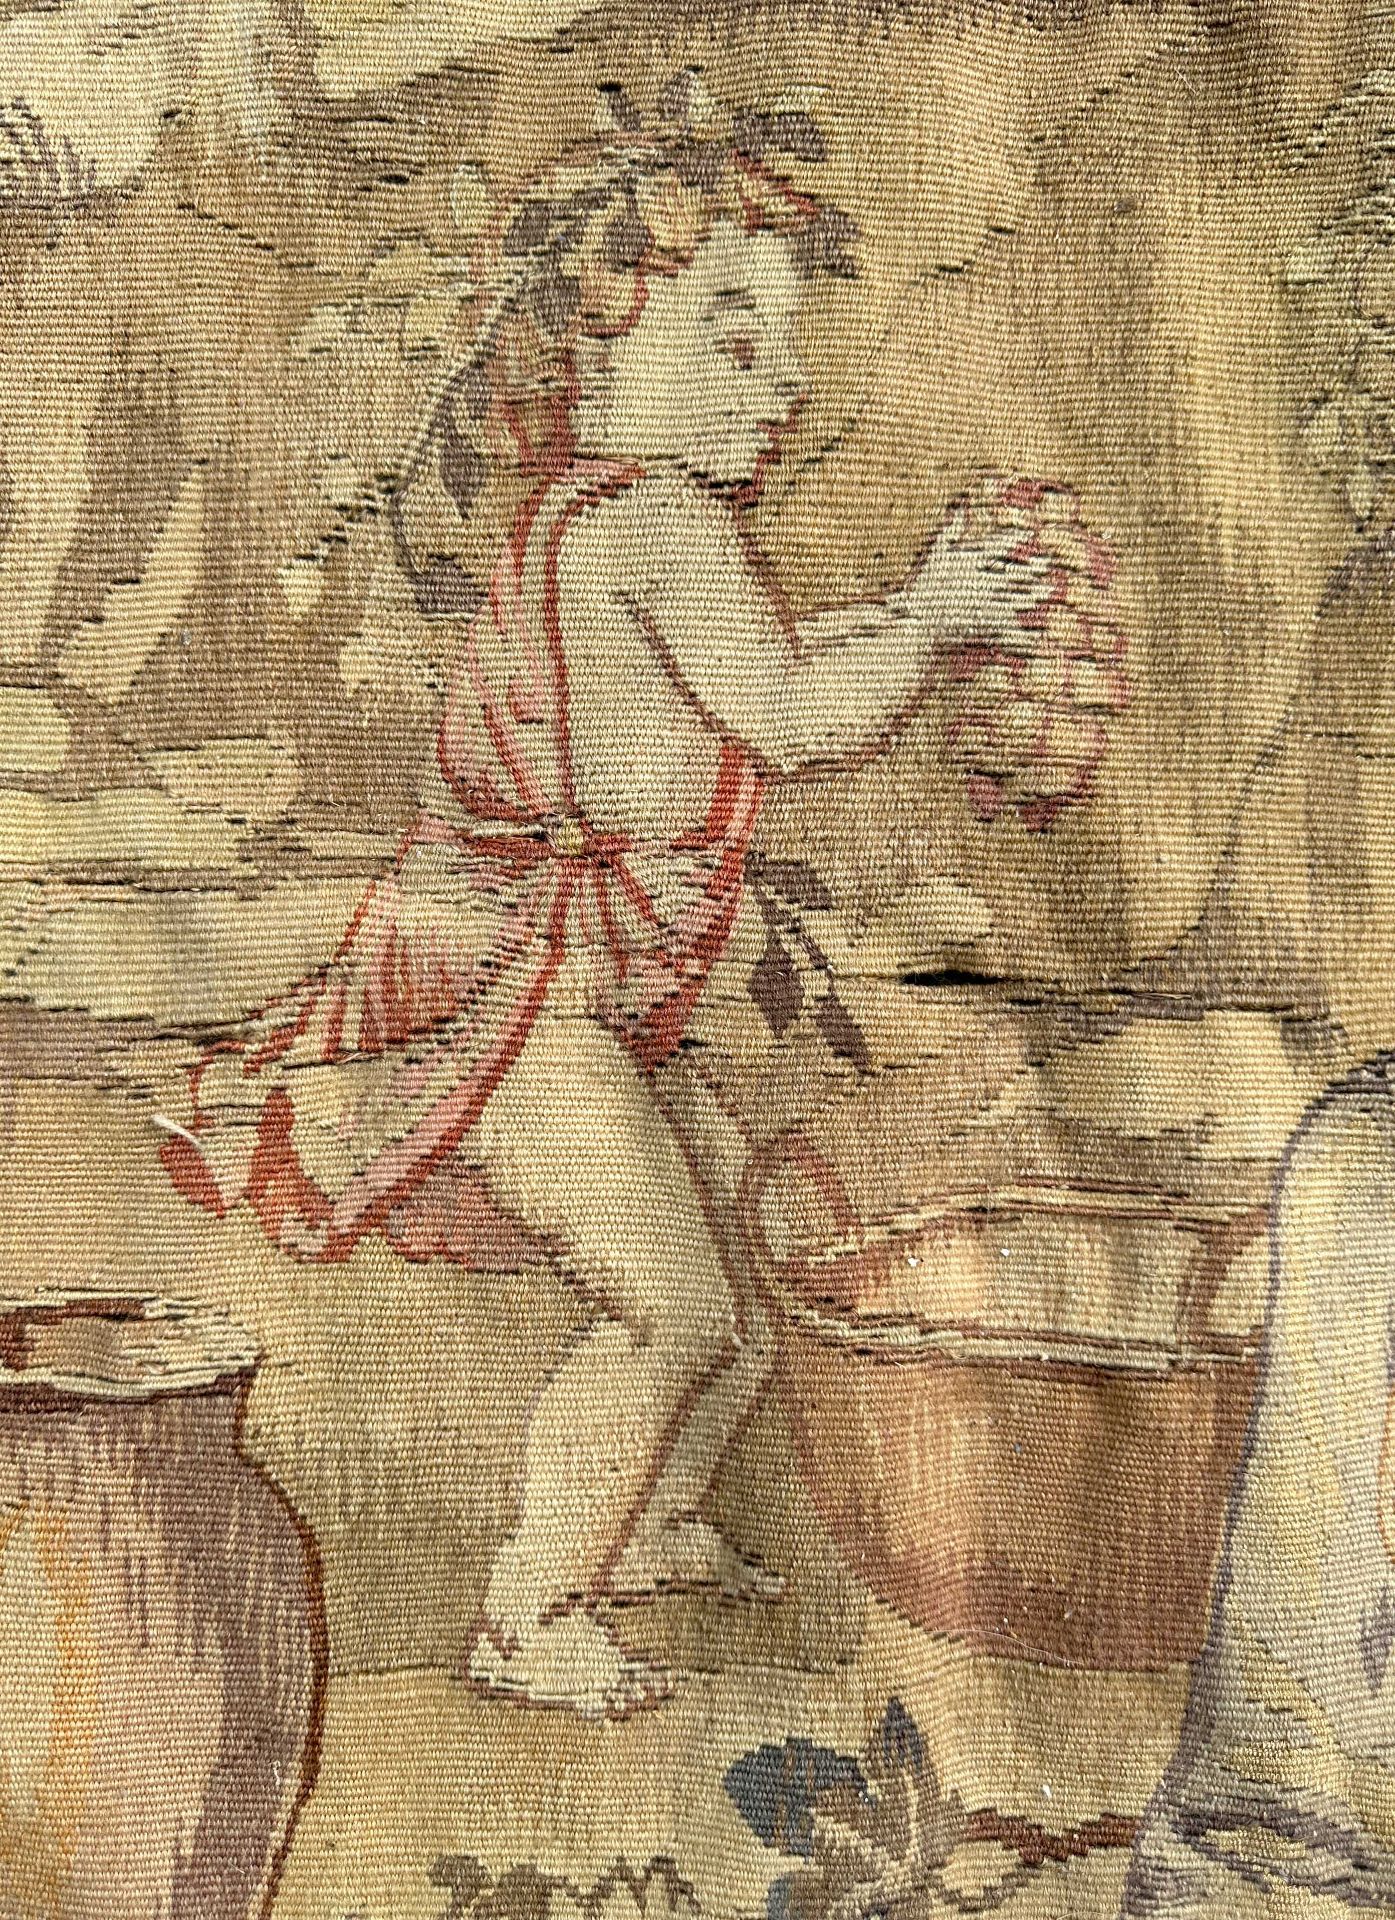 Tapestry. 19th century. Youthful Bacchus. - Image 8 of 12